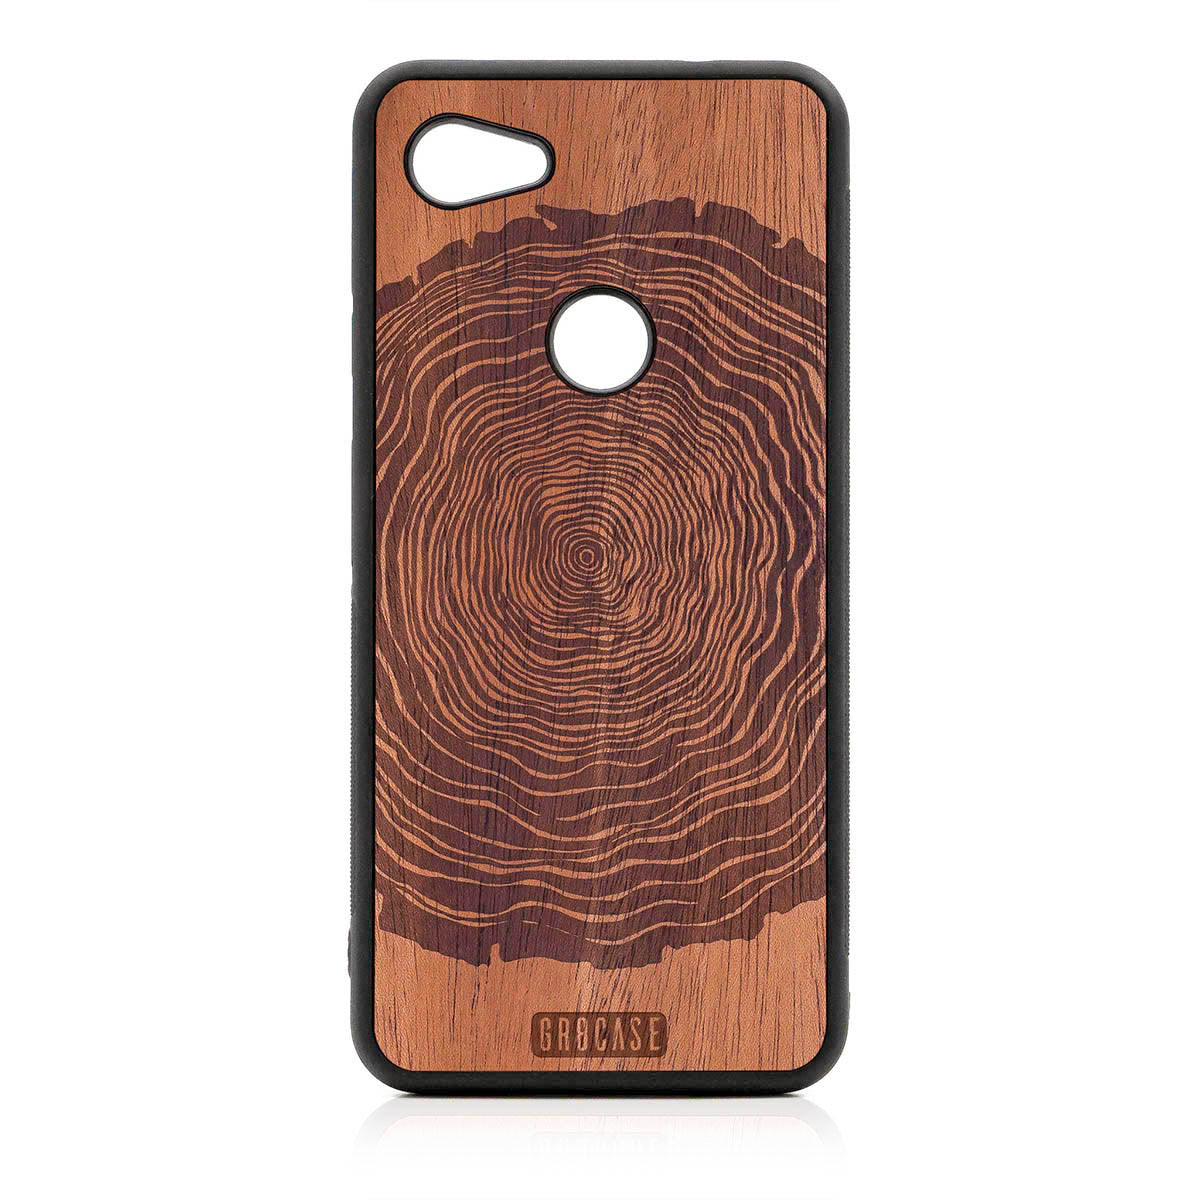 Tree Rings Design Wood Case For Google Pixel 3A